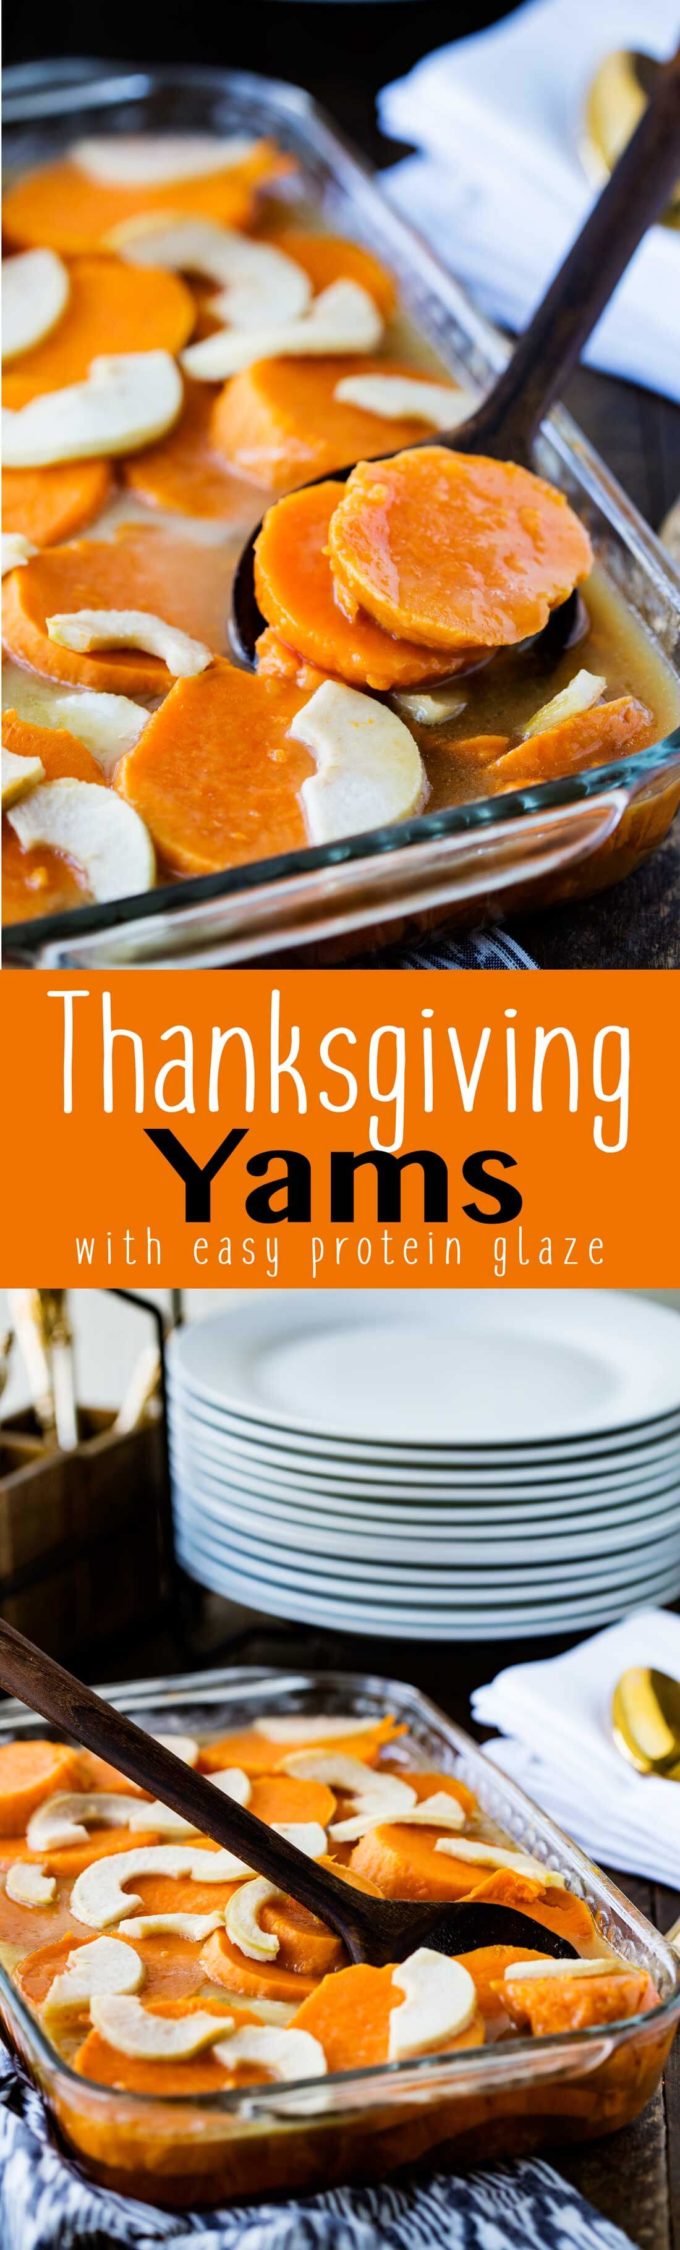 These are the BEST Thanksgiving Yams ever. They are not too sweet and are super easy to make.